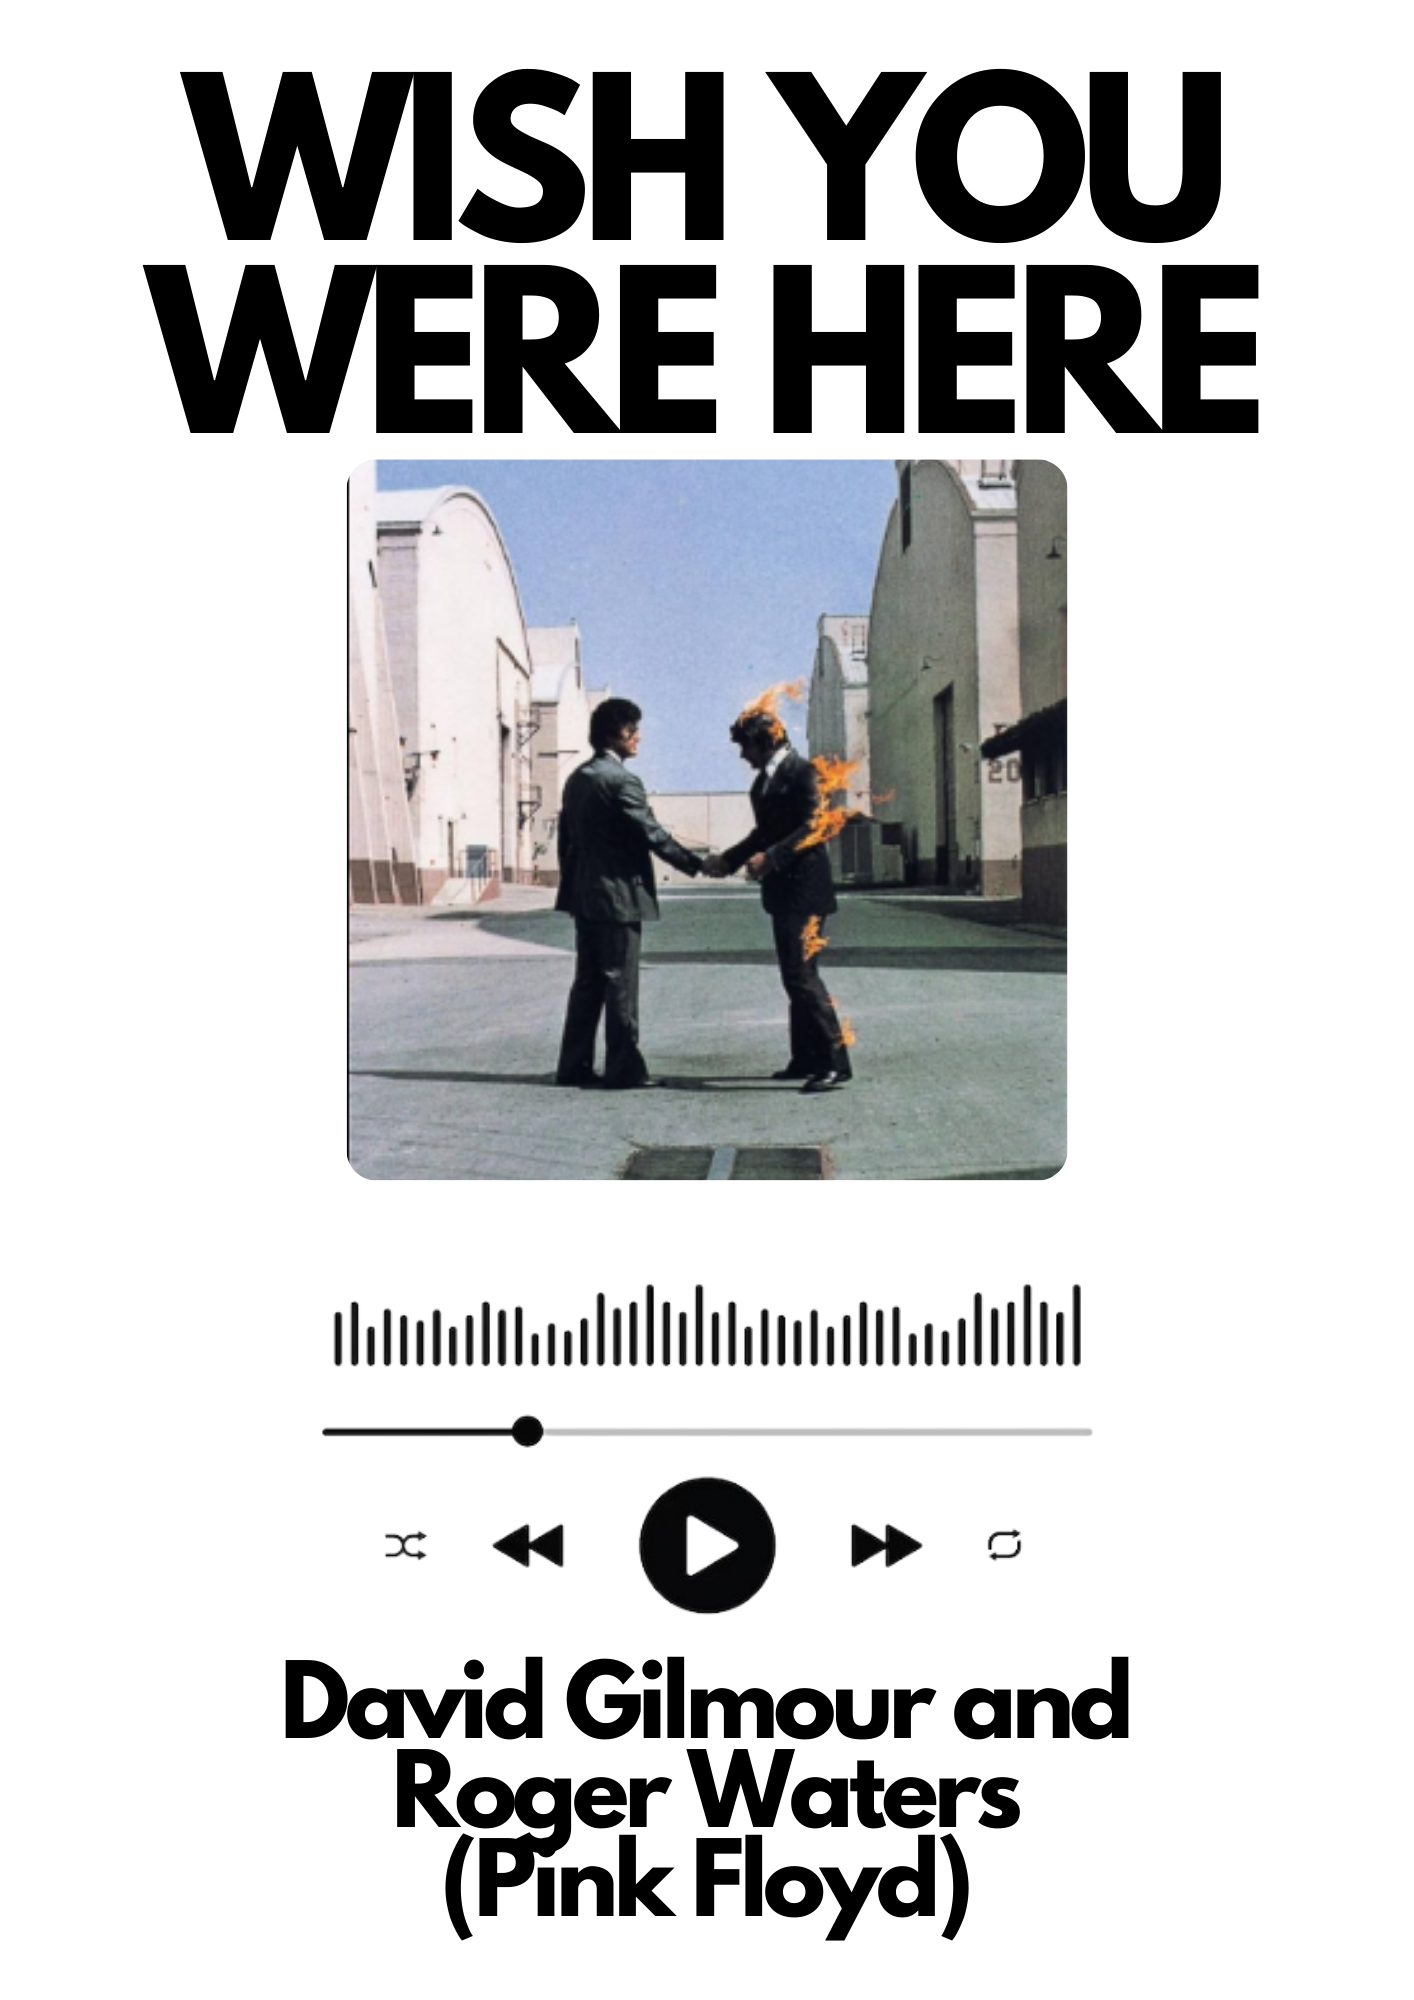 Wish you were here - Pink Floyd